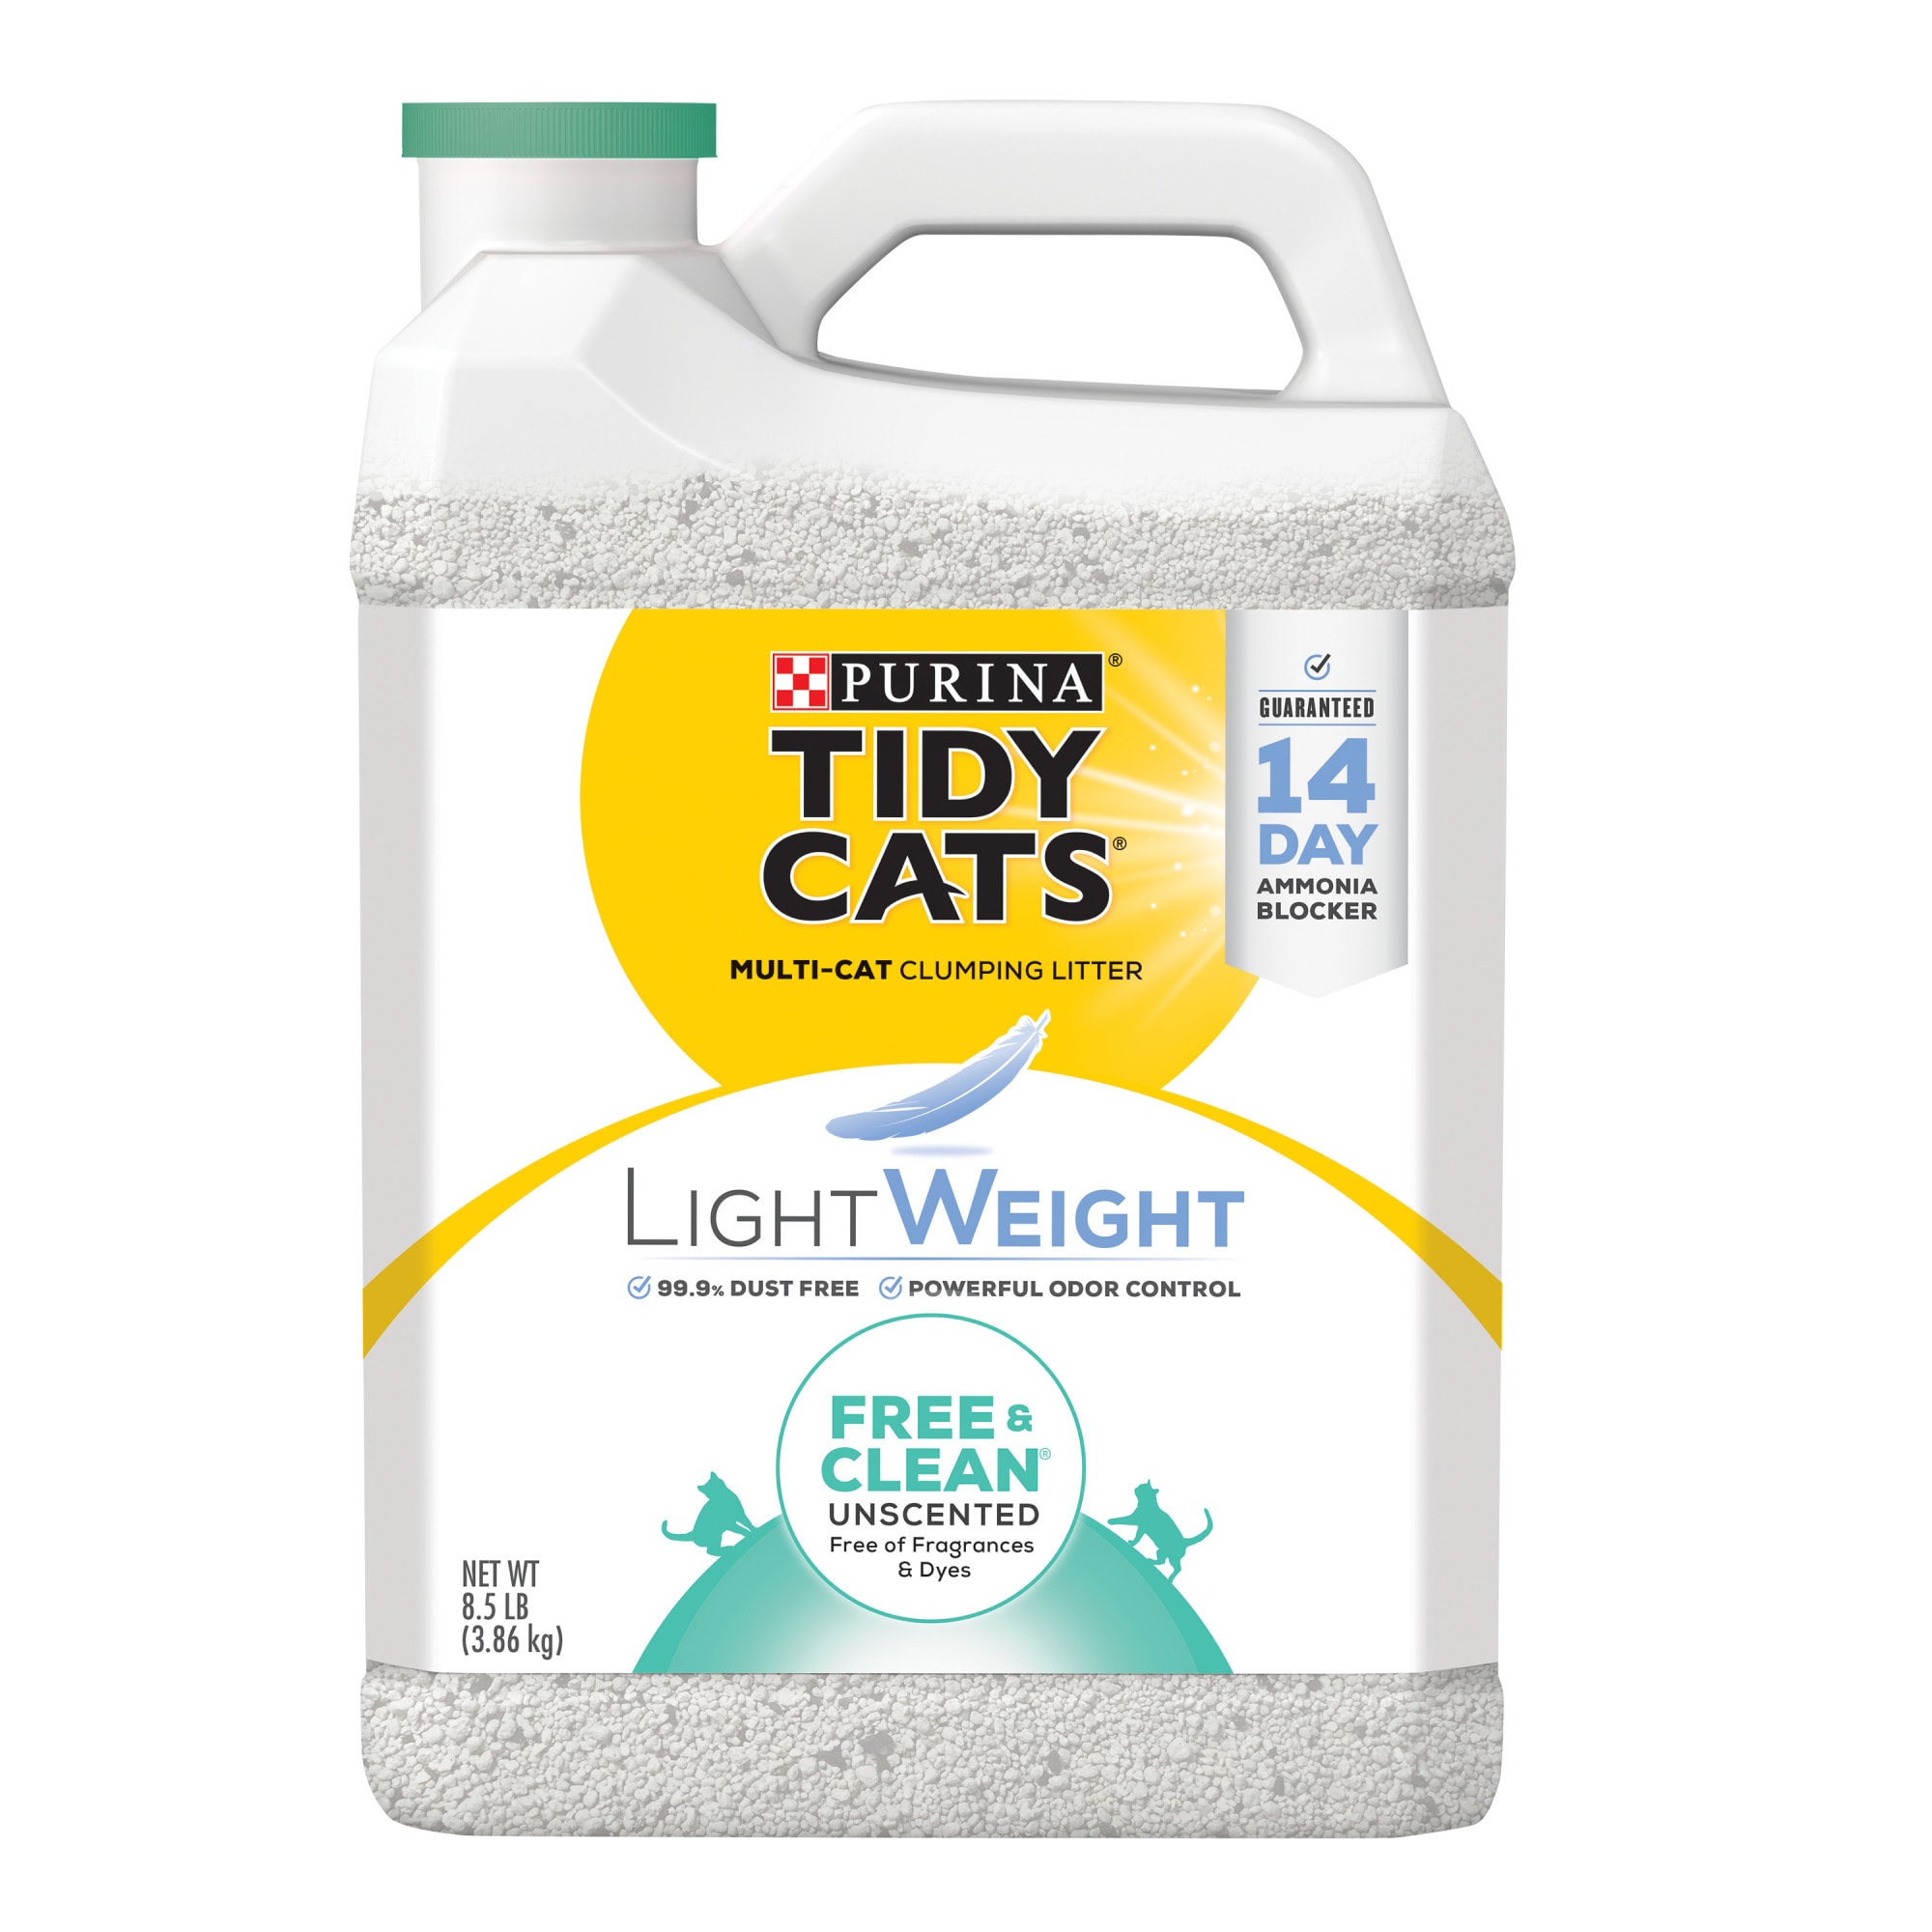 Purina Tidy Cats LightWeight Free & Clean Unscented Dust Free Clumping